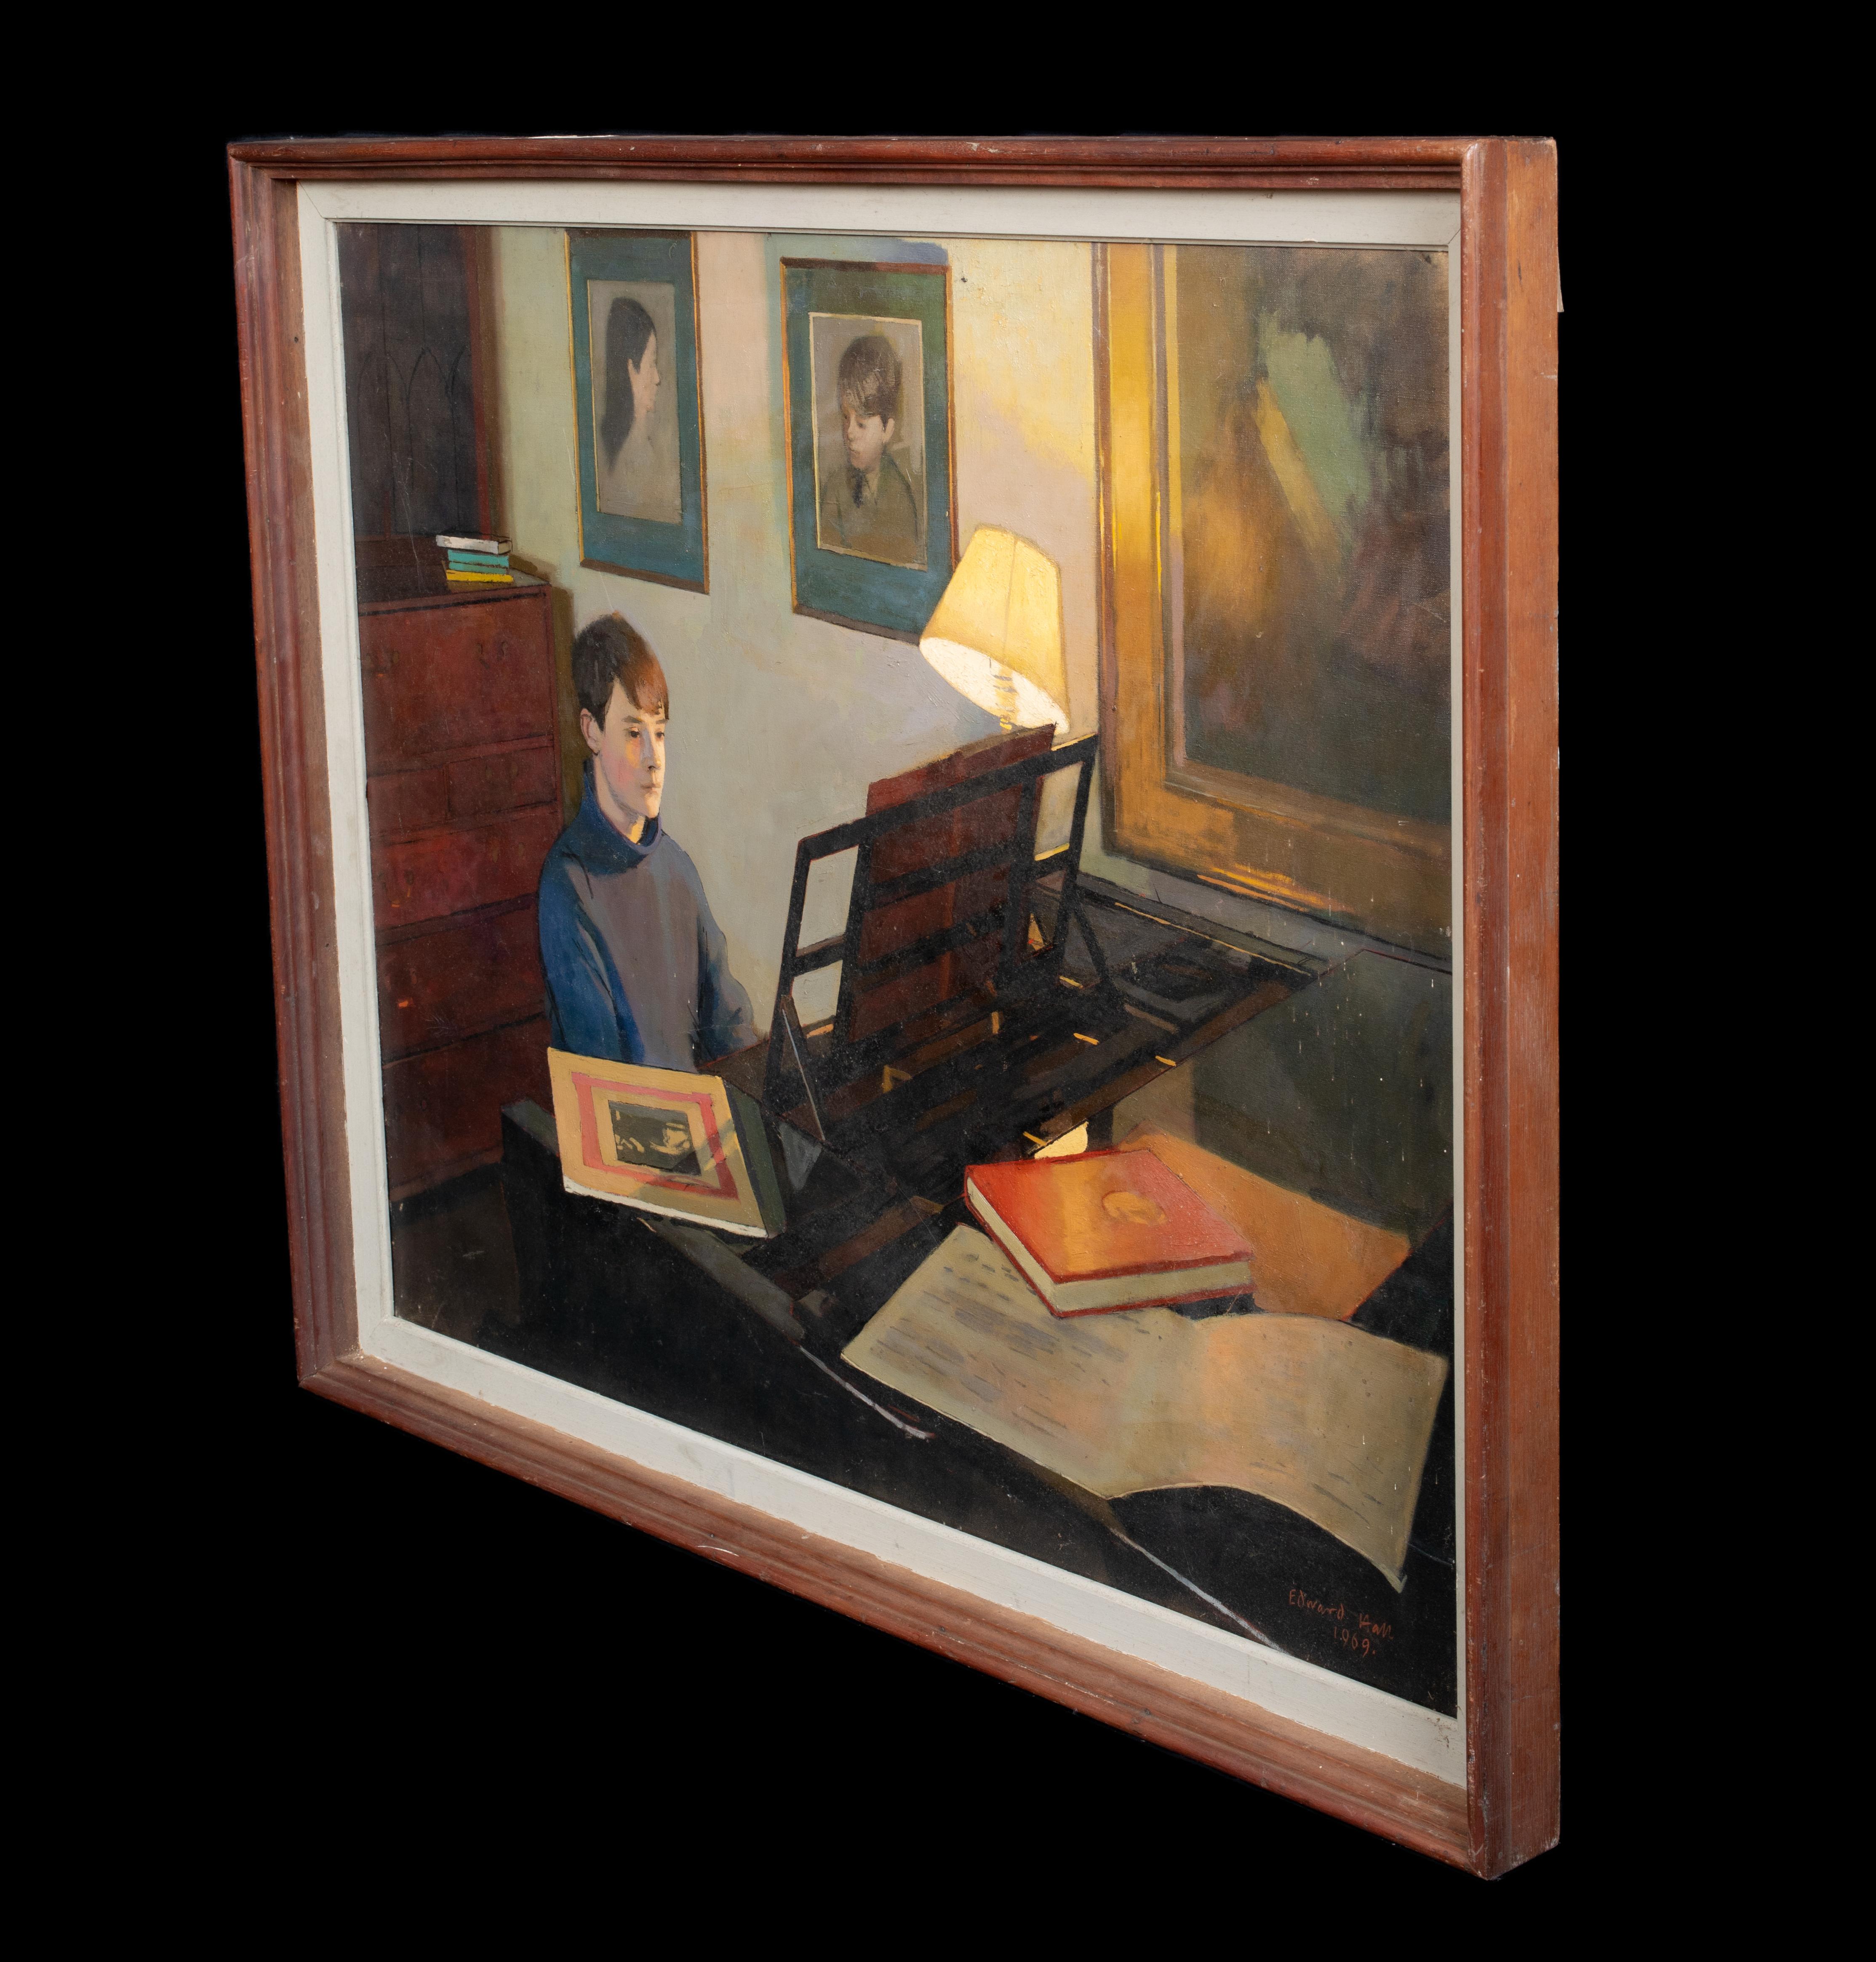 Matthew At The Piano, dated 1969  by EDWARD HALL (1922-1991) For Sale 6